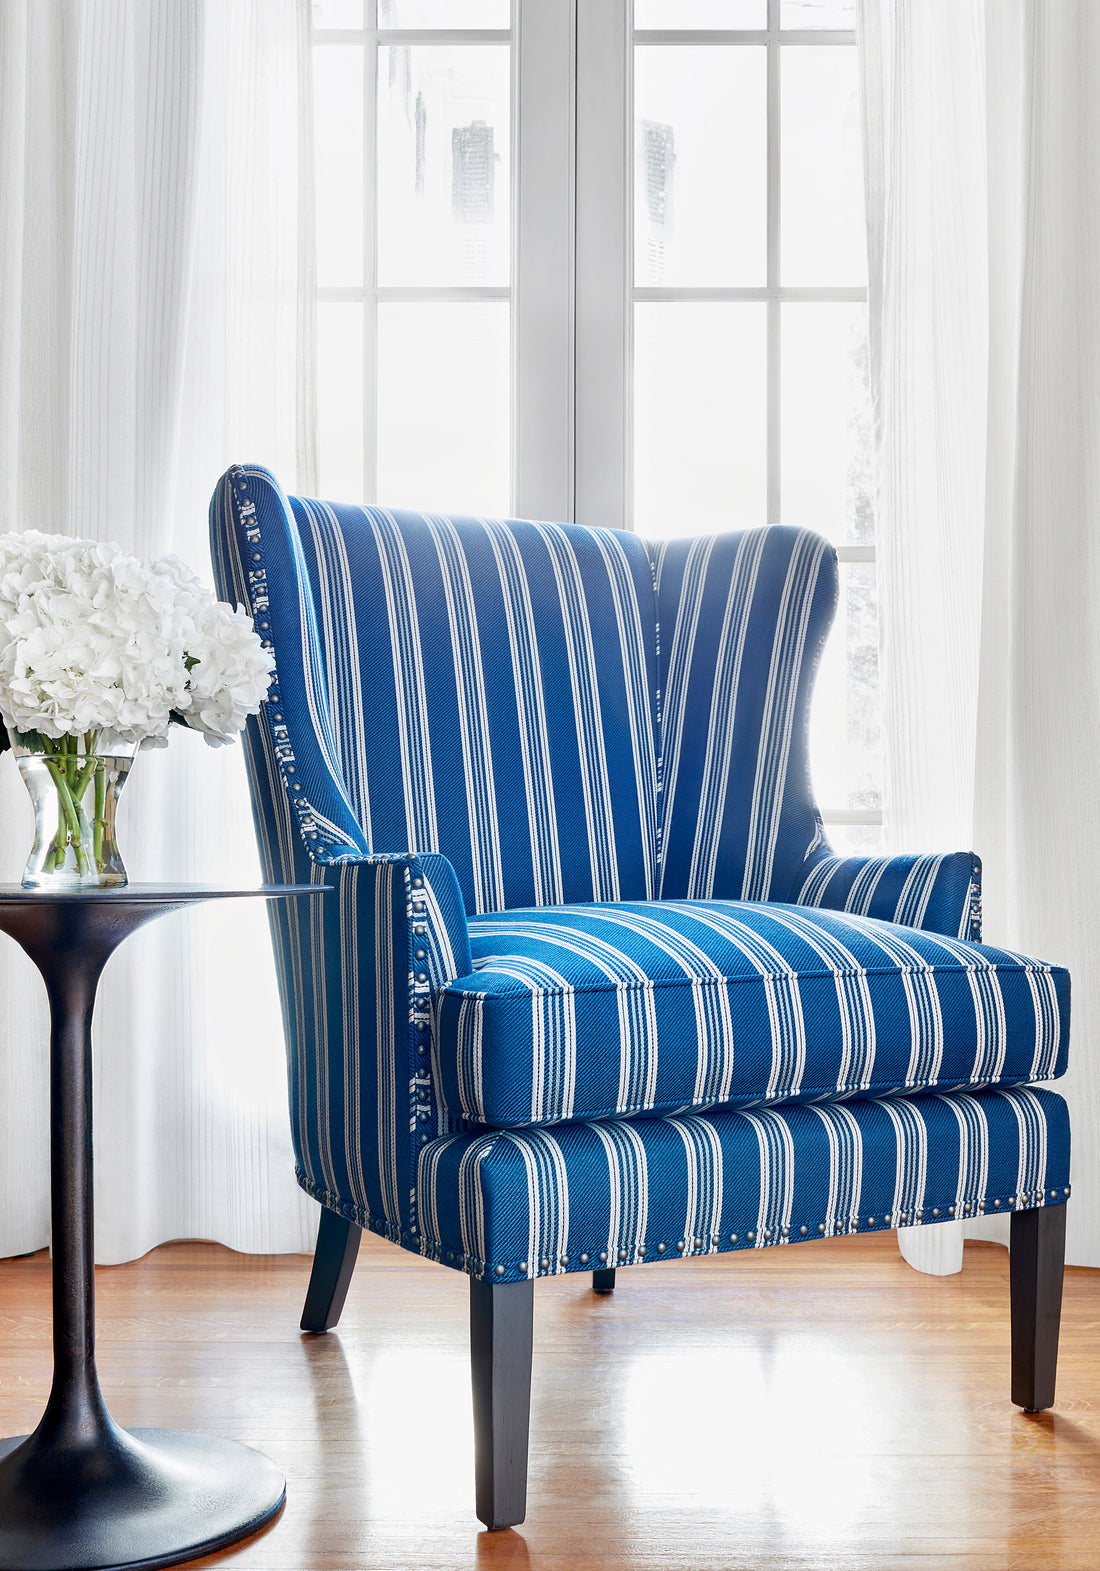 Monterey Chair in Colonnade Stripe woven fabric in navy color - pattern number W80735 - by Thibaut in the Woven Resource Vol 11 Rialto collection